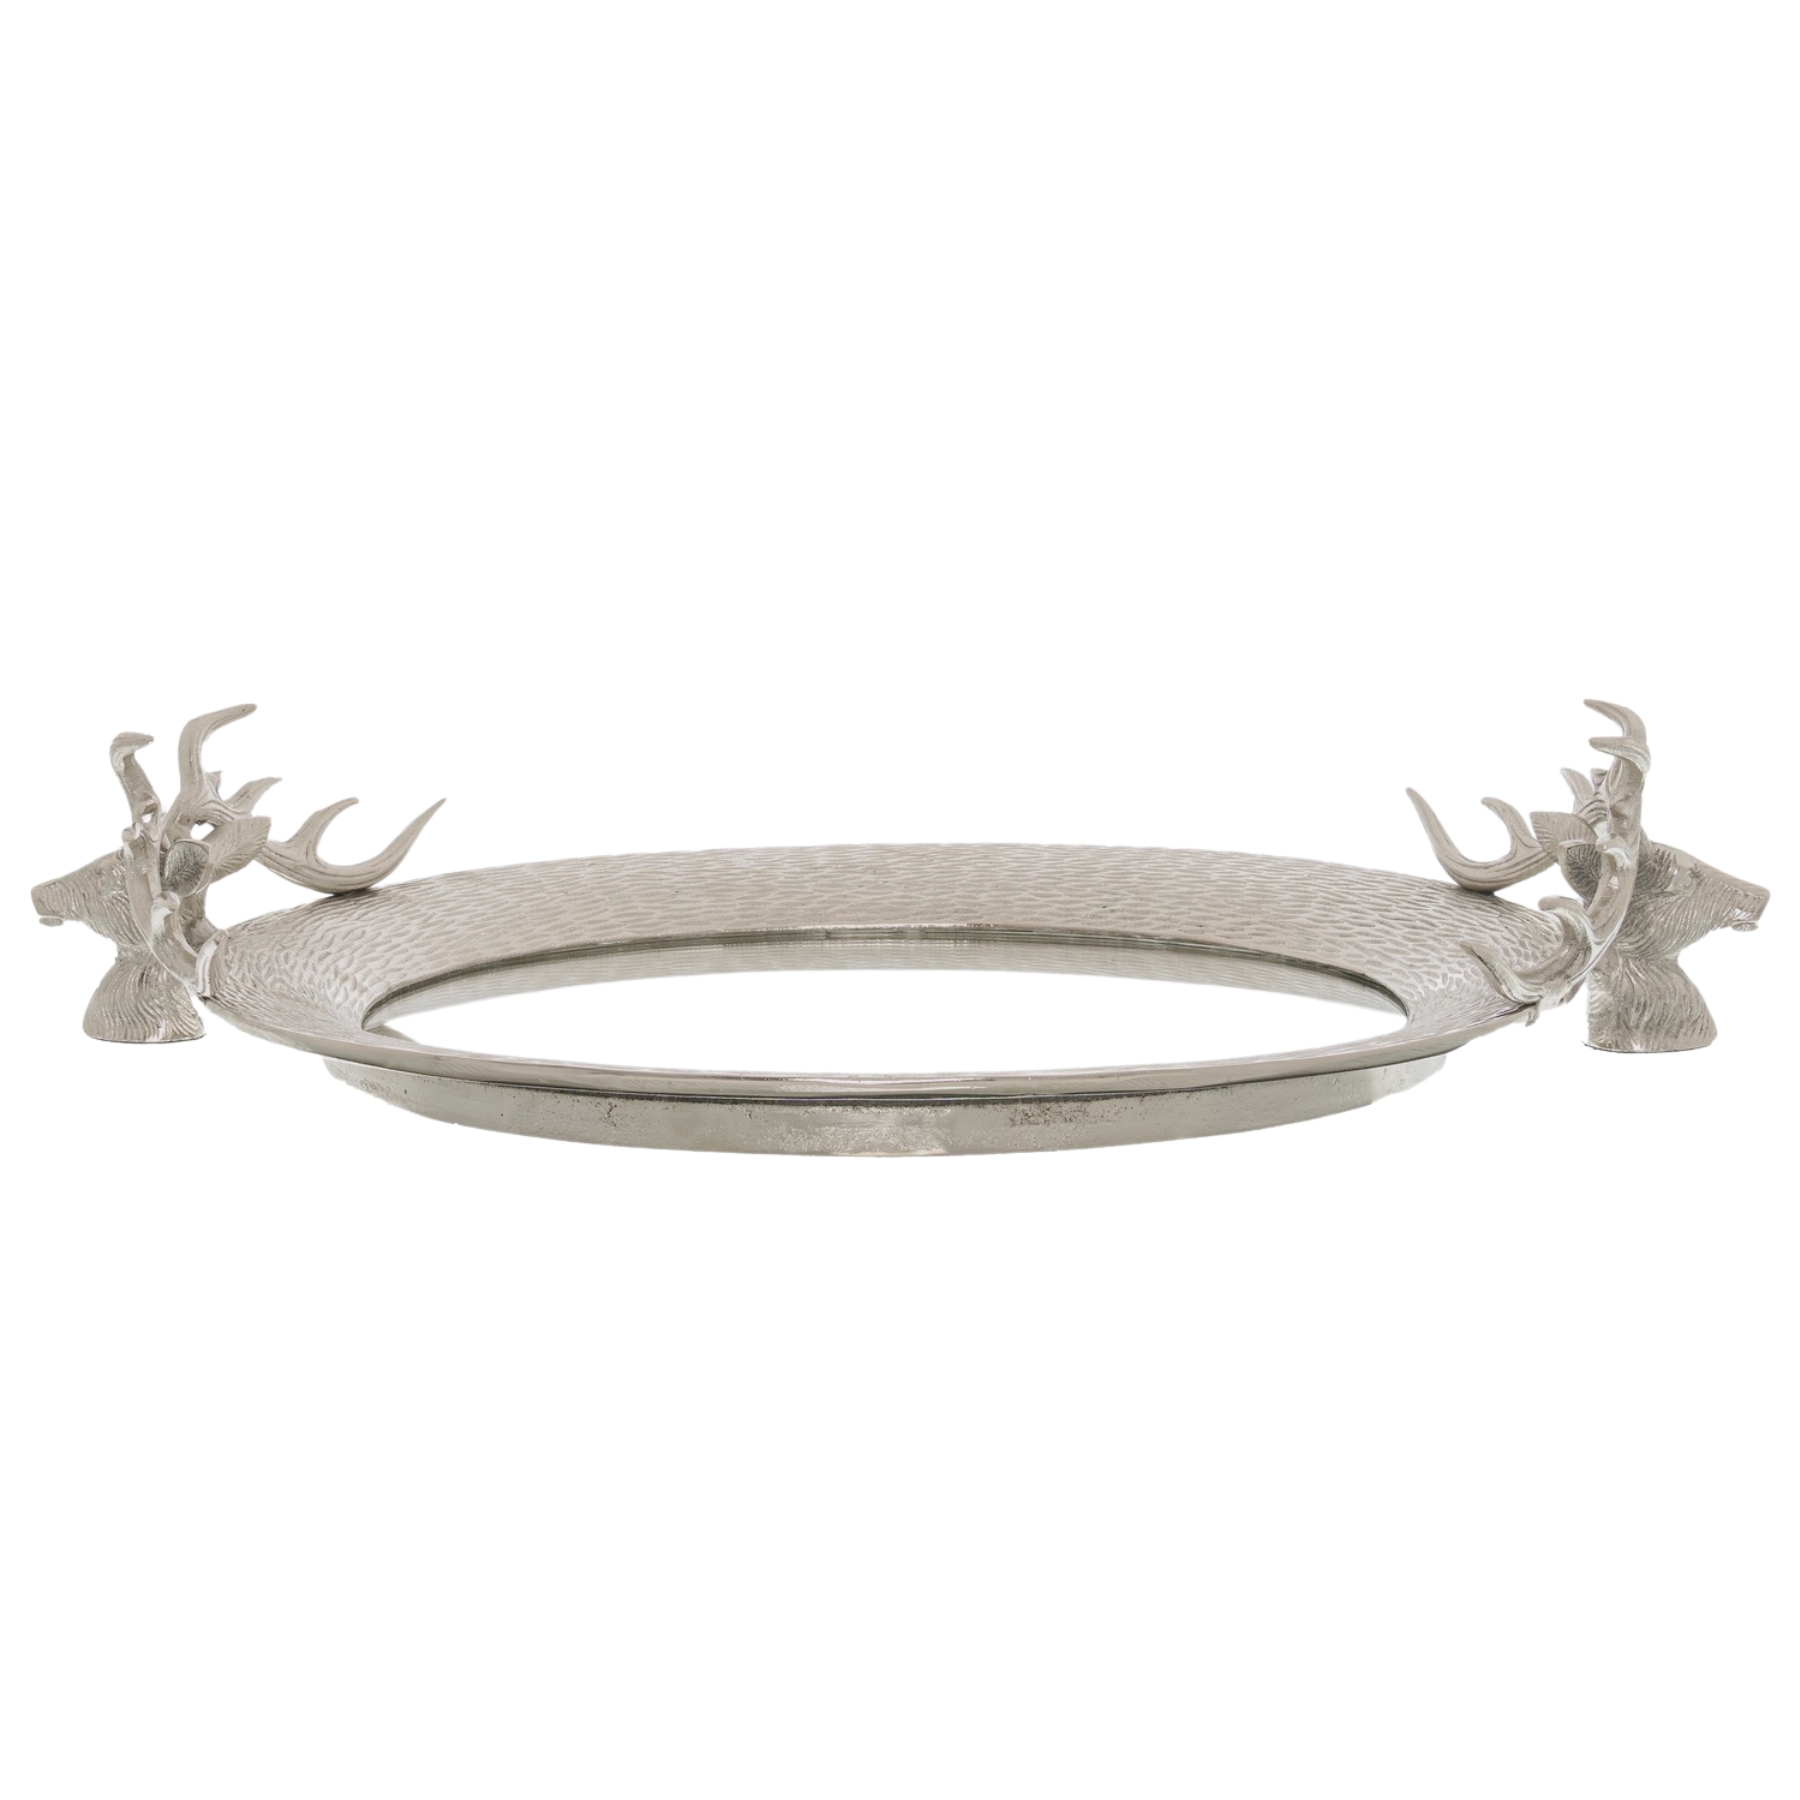 Large Mirrored Tray With Stag Heads - Image 1